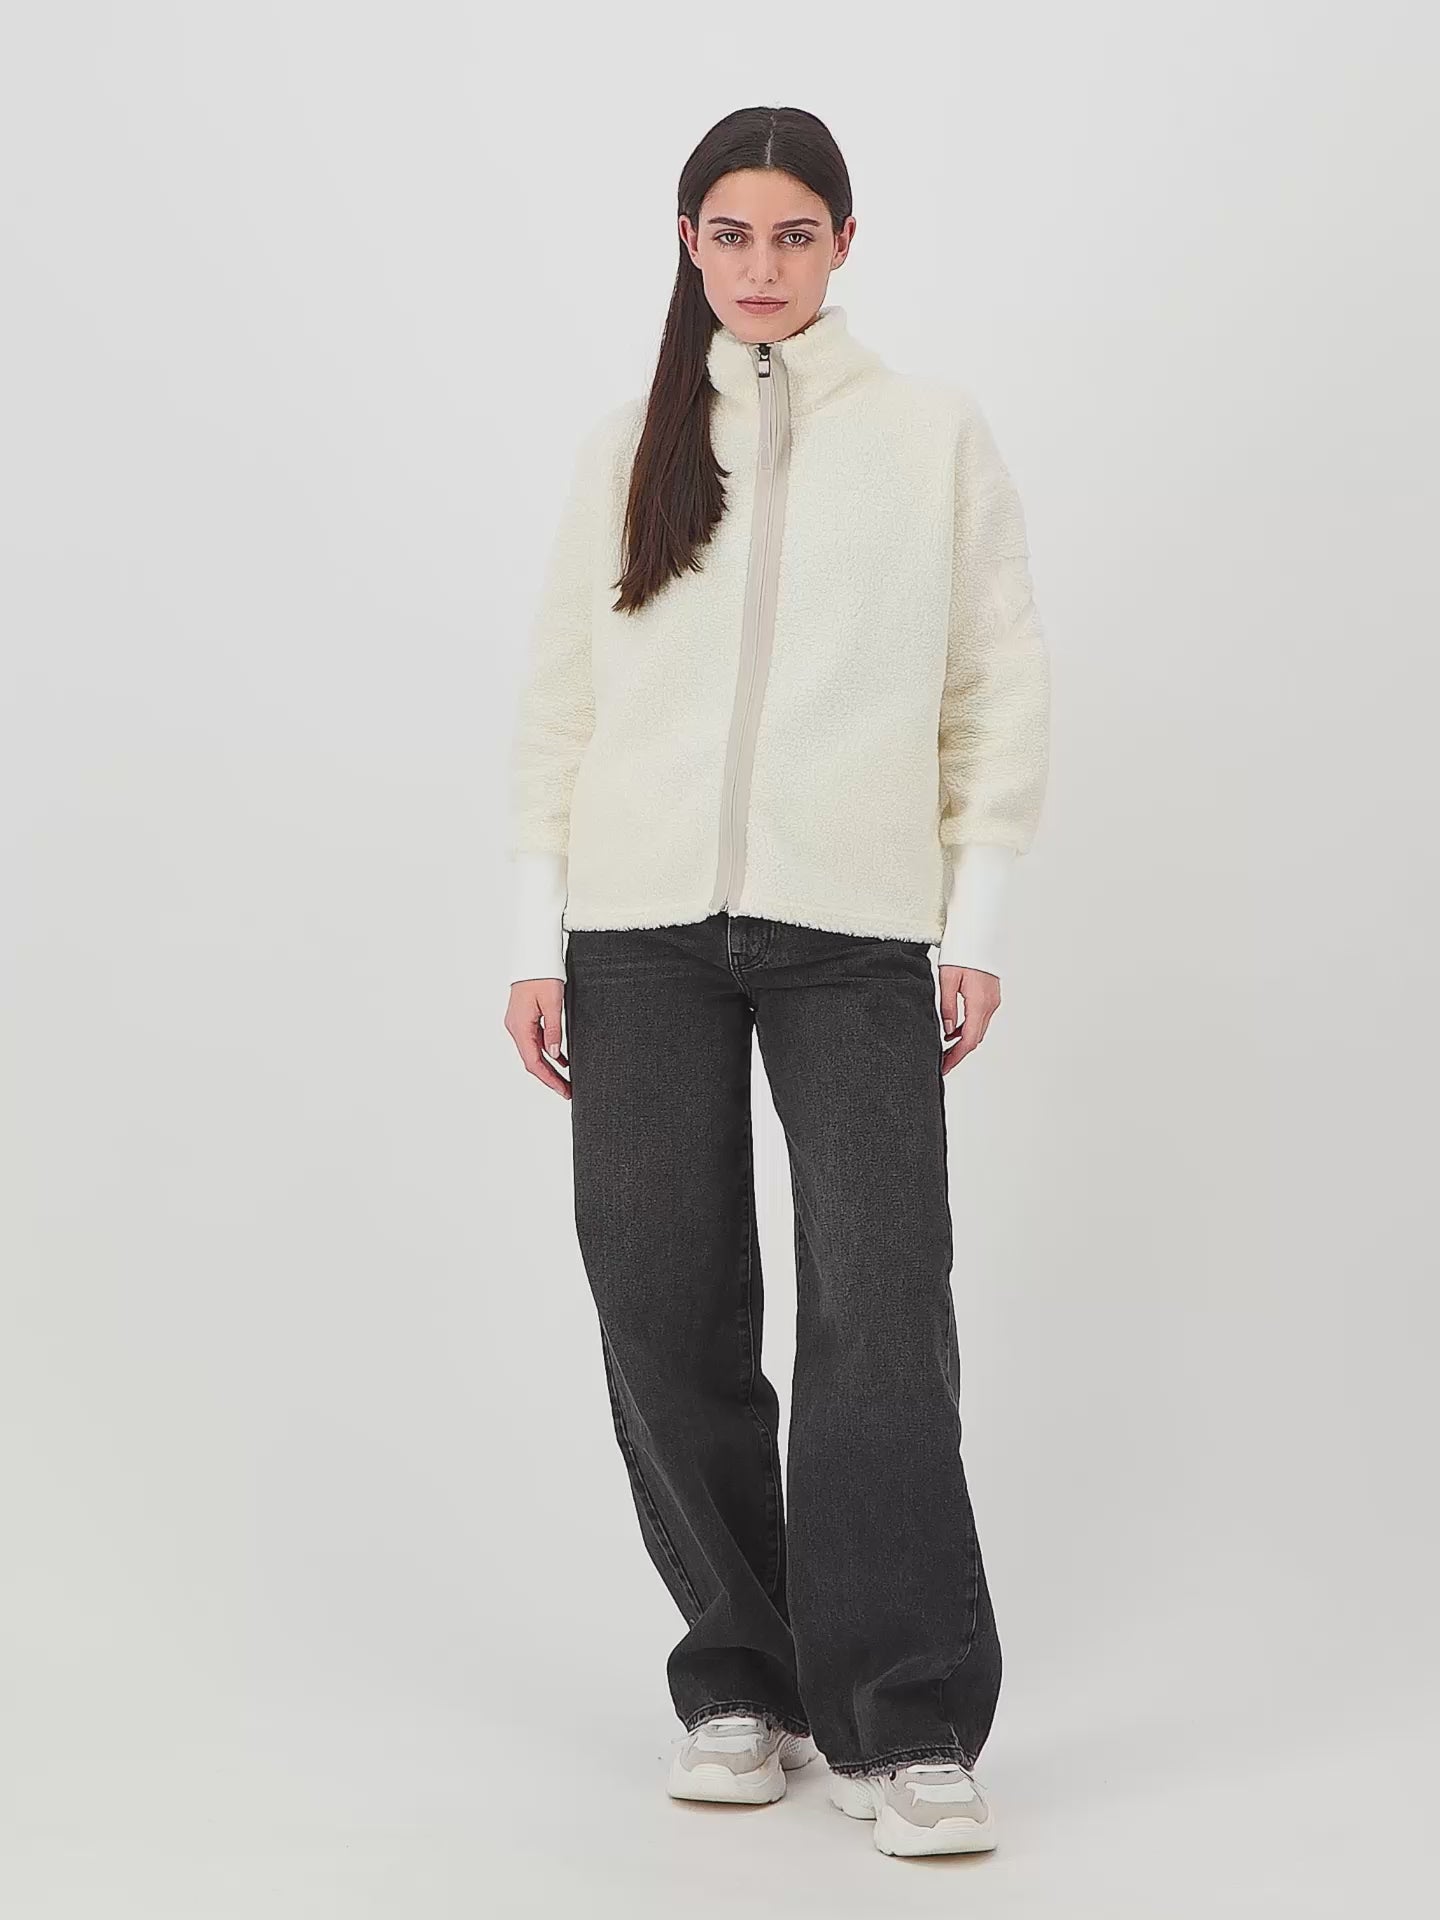 boxy fit white fleece jacket with full zip and deep cuffs, two side pockets